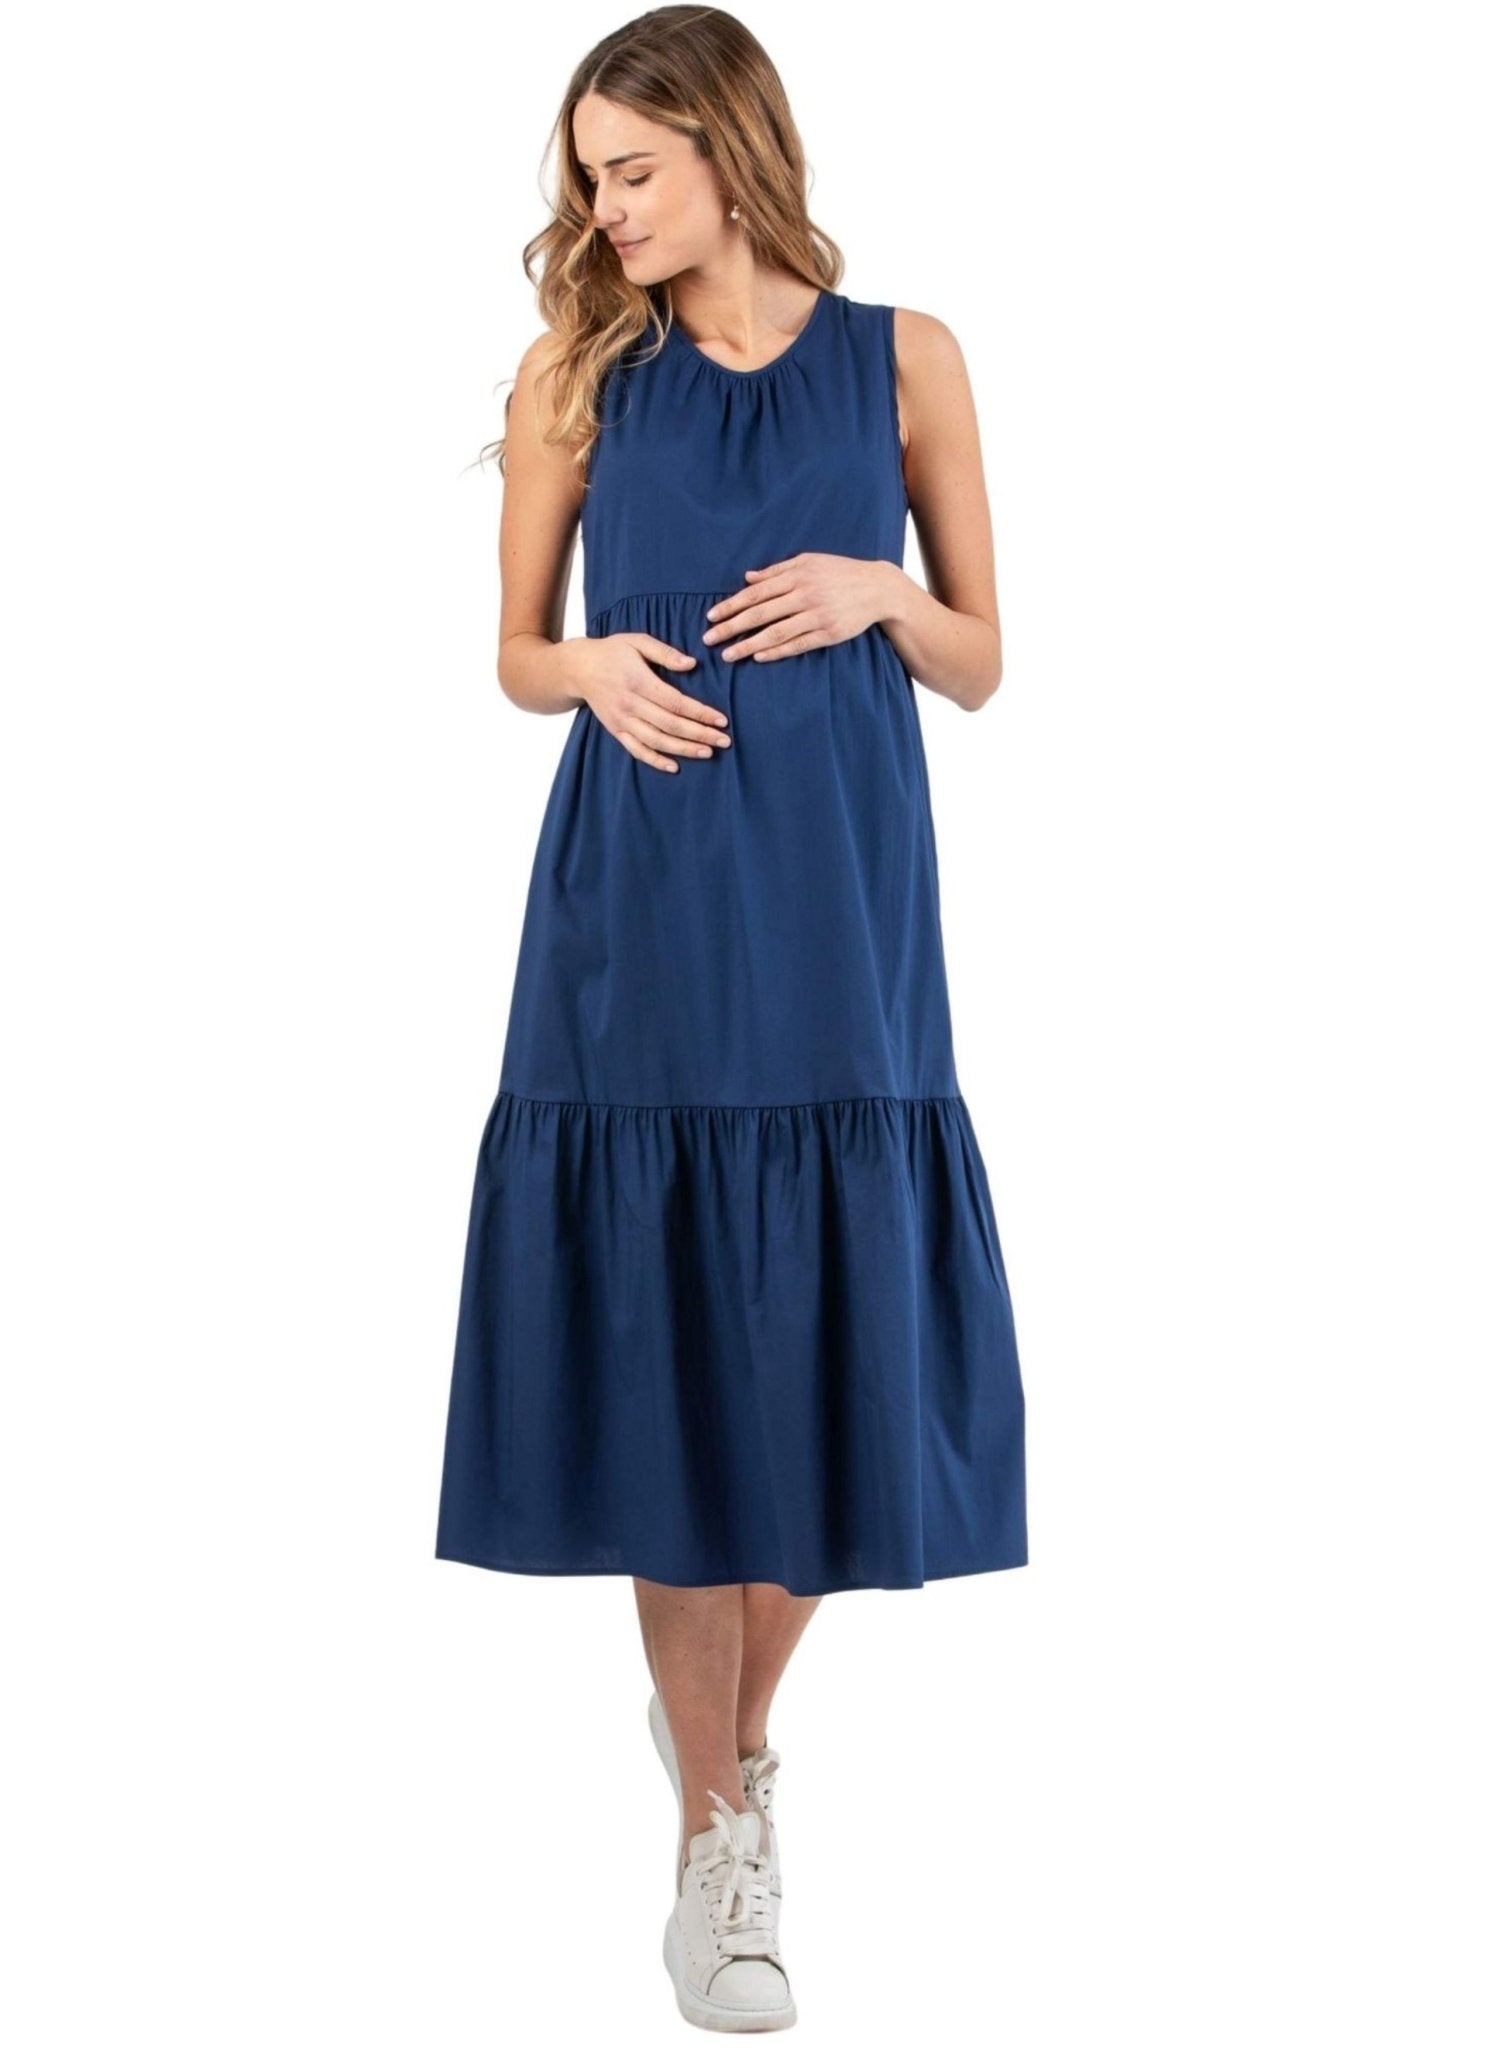 Midi Maternity Dress with Flounces and Cord with Pearls - Blue - Mums and Bumps